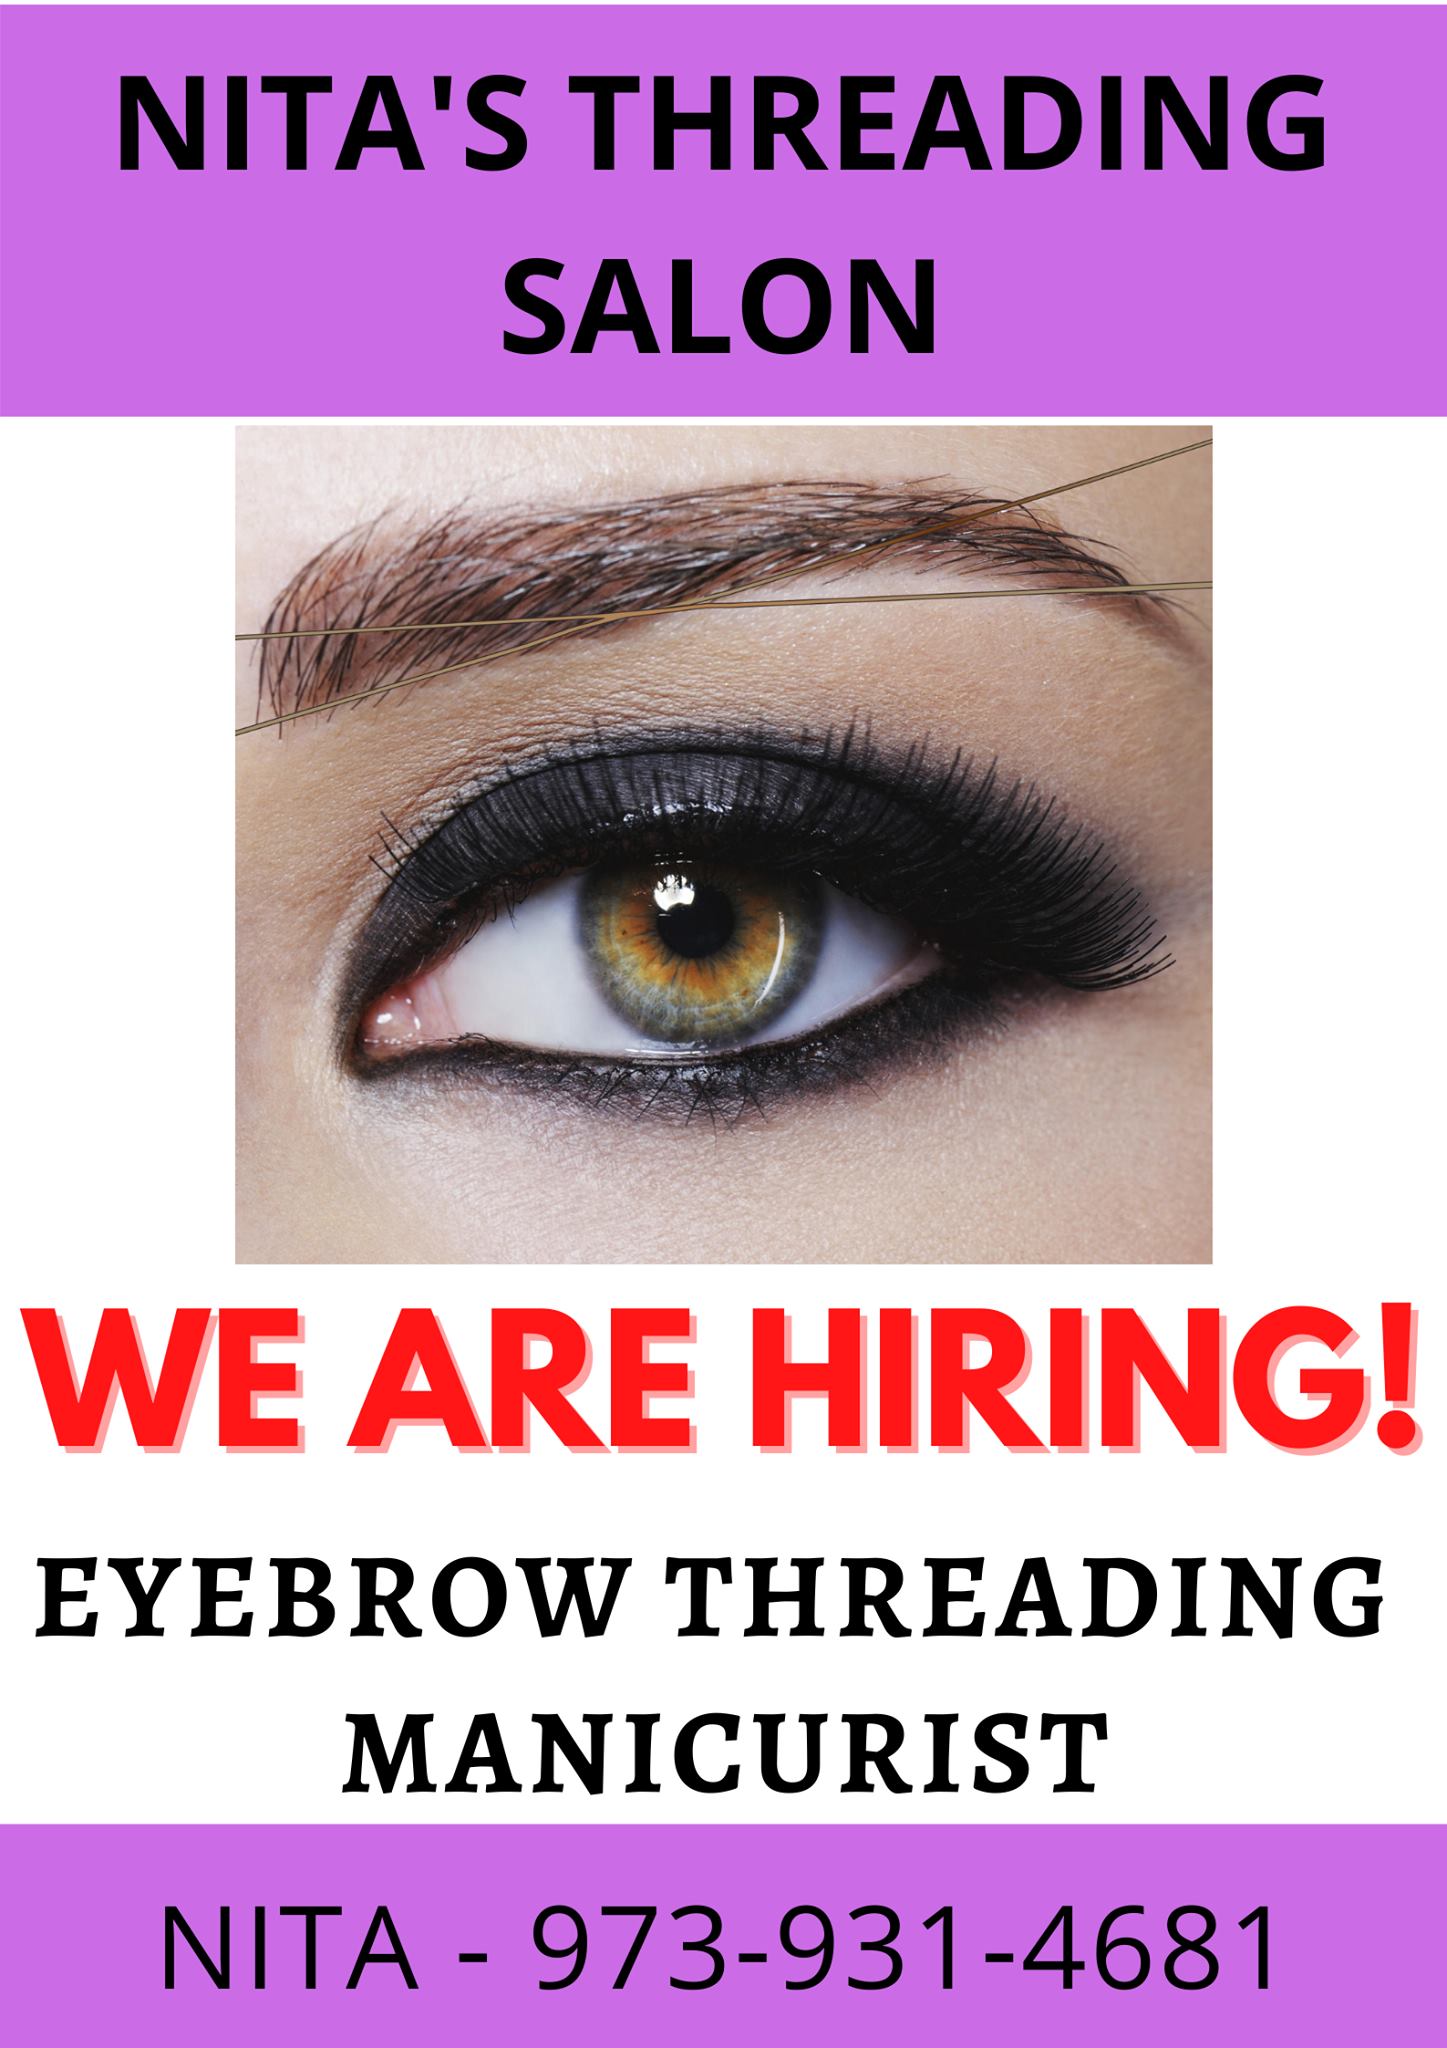 Nita's Threading Salon 368 Paterson Ave, East Rutherford New Jersey 07073